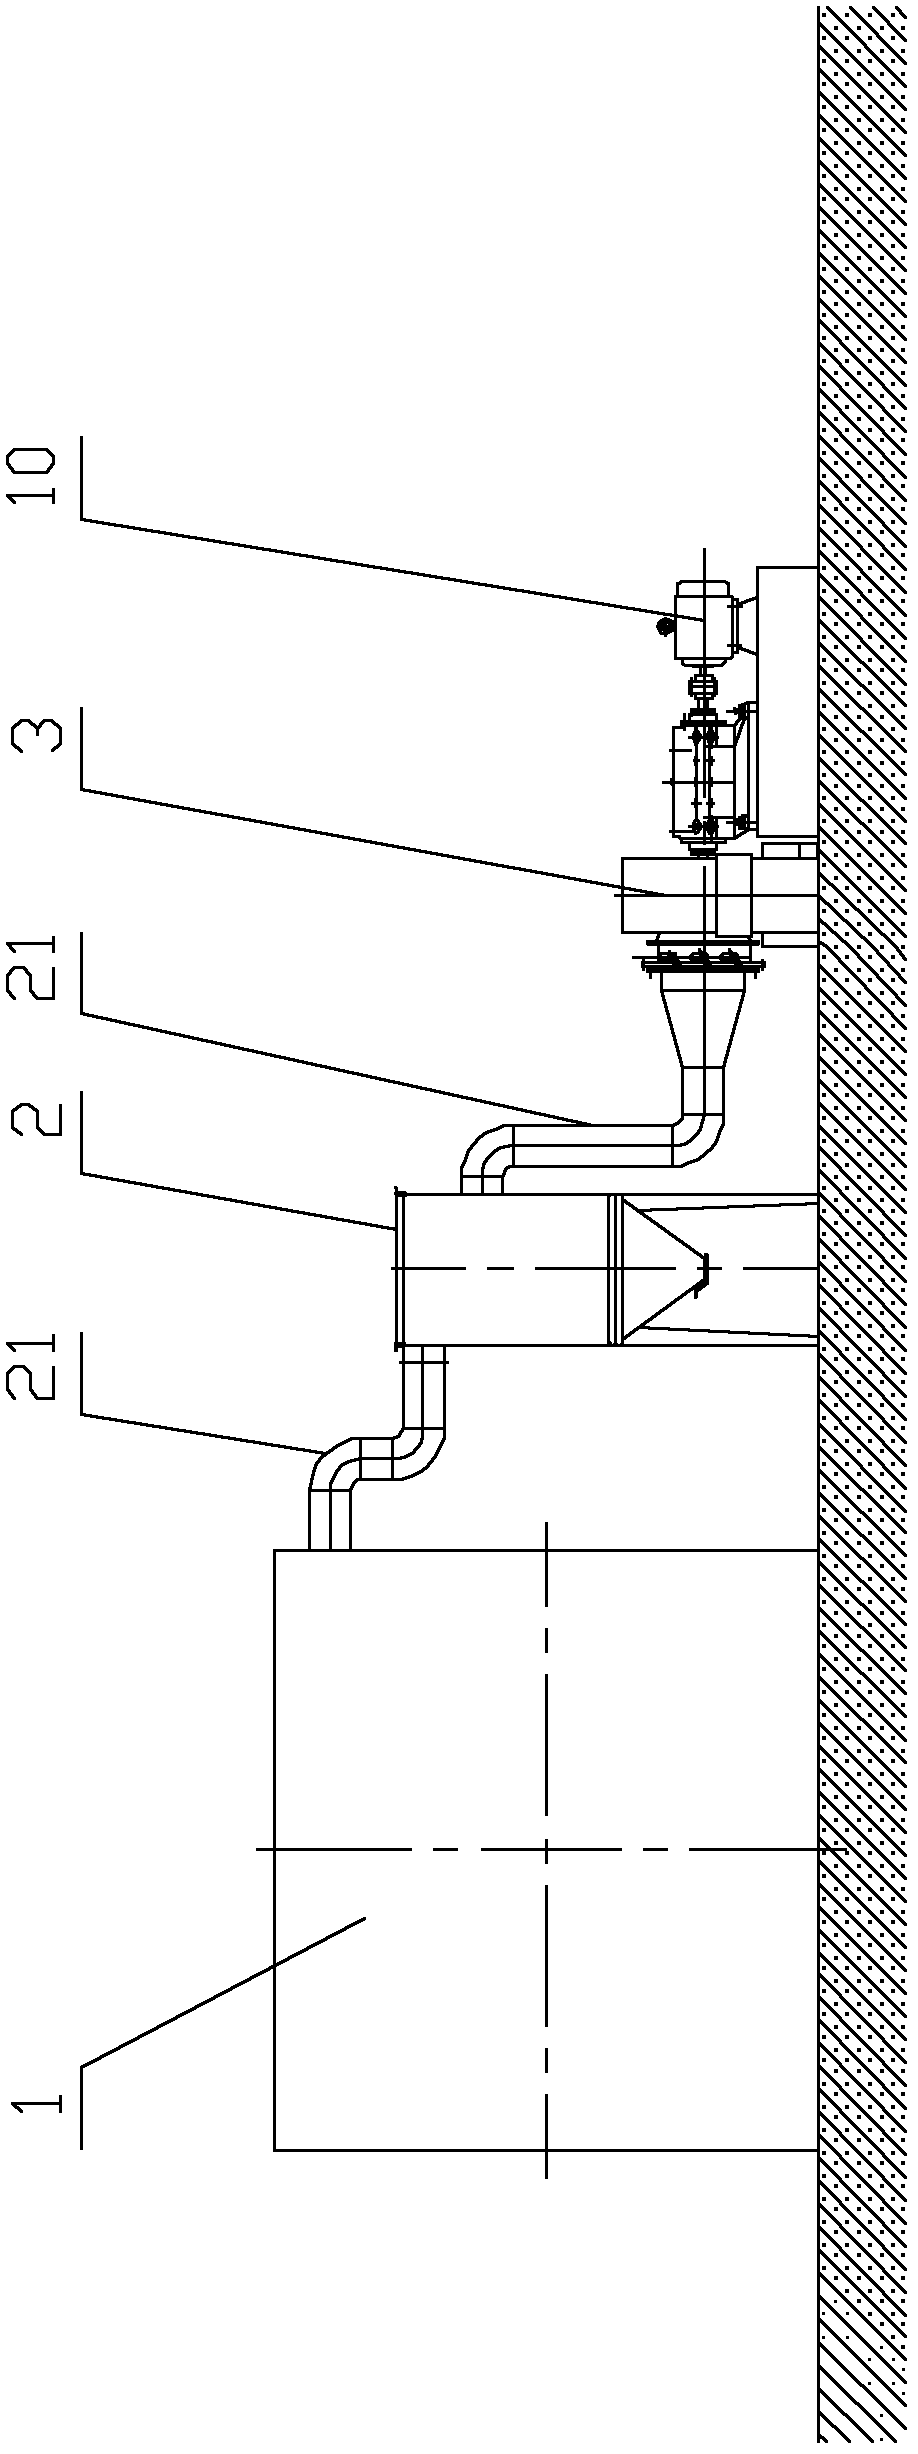 Condensing dioxygen method desulfuration denitration integration device and process thereof